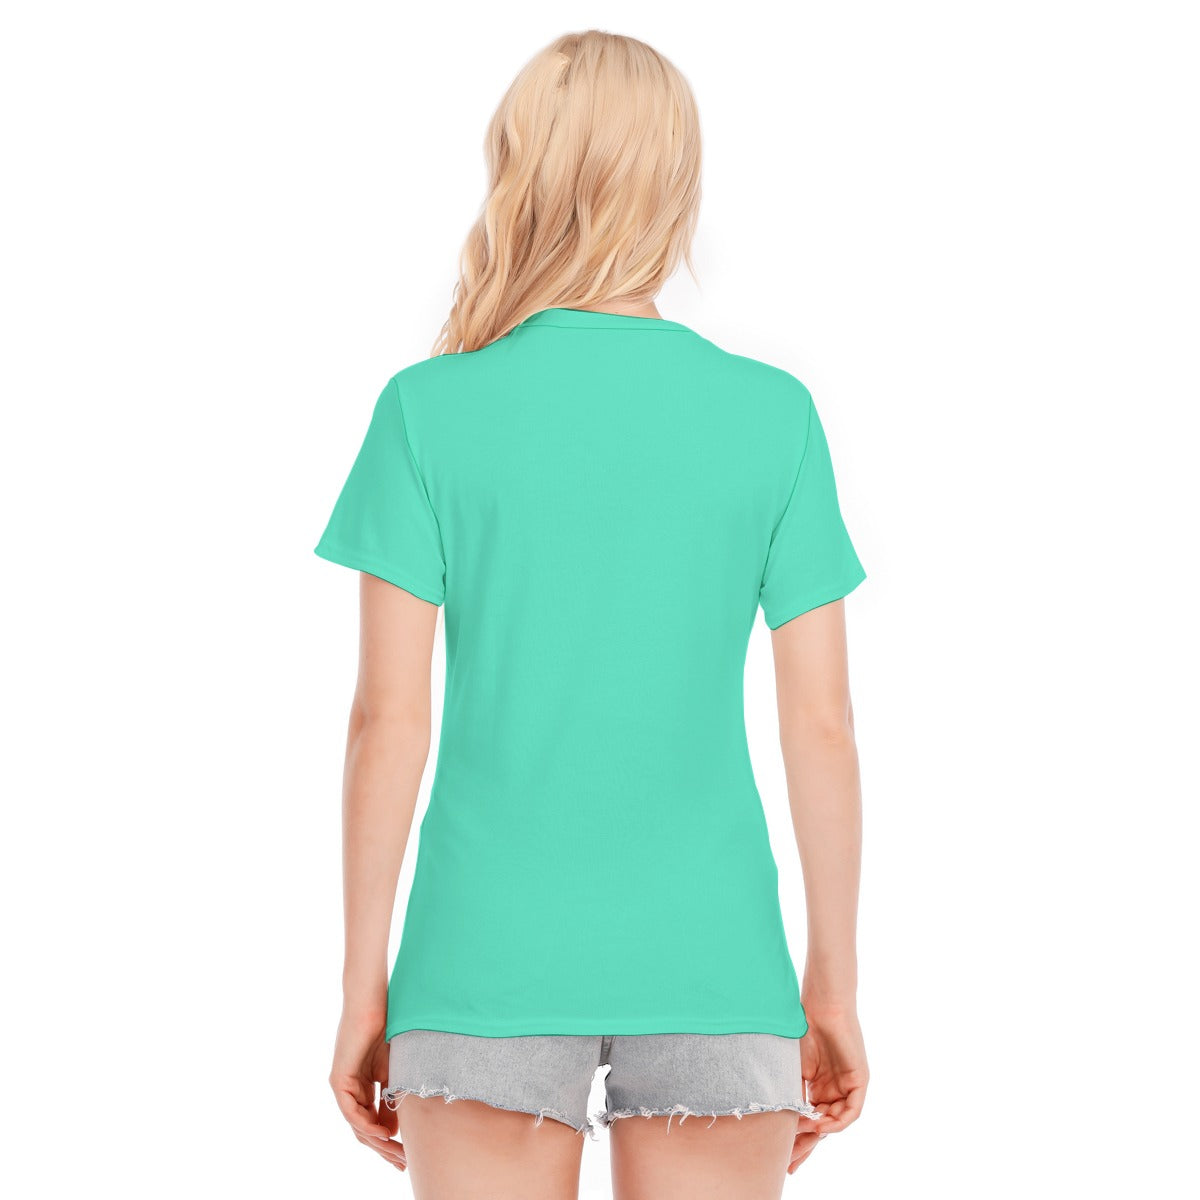 👚 Officially Sexy Turquoise Green With White Logo Women's Round Neck T-Shirt | 190GSM CottonColor #50E3C2 👚